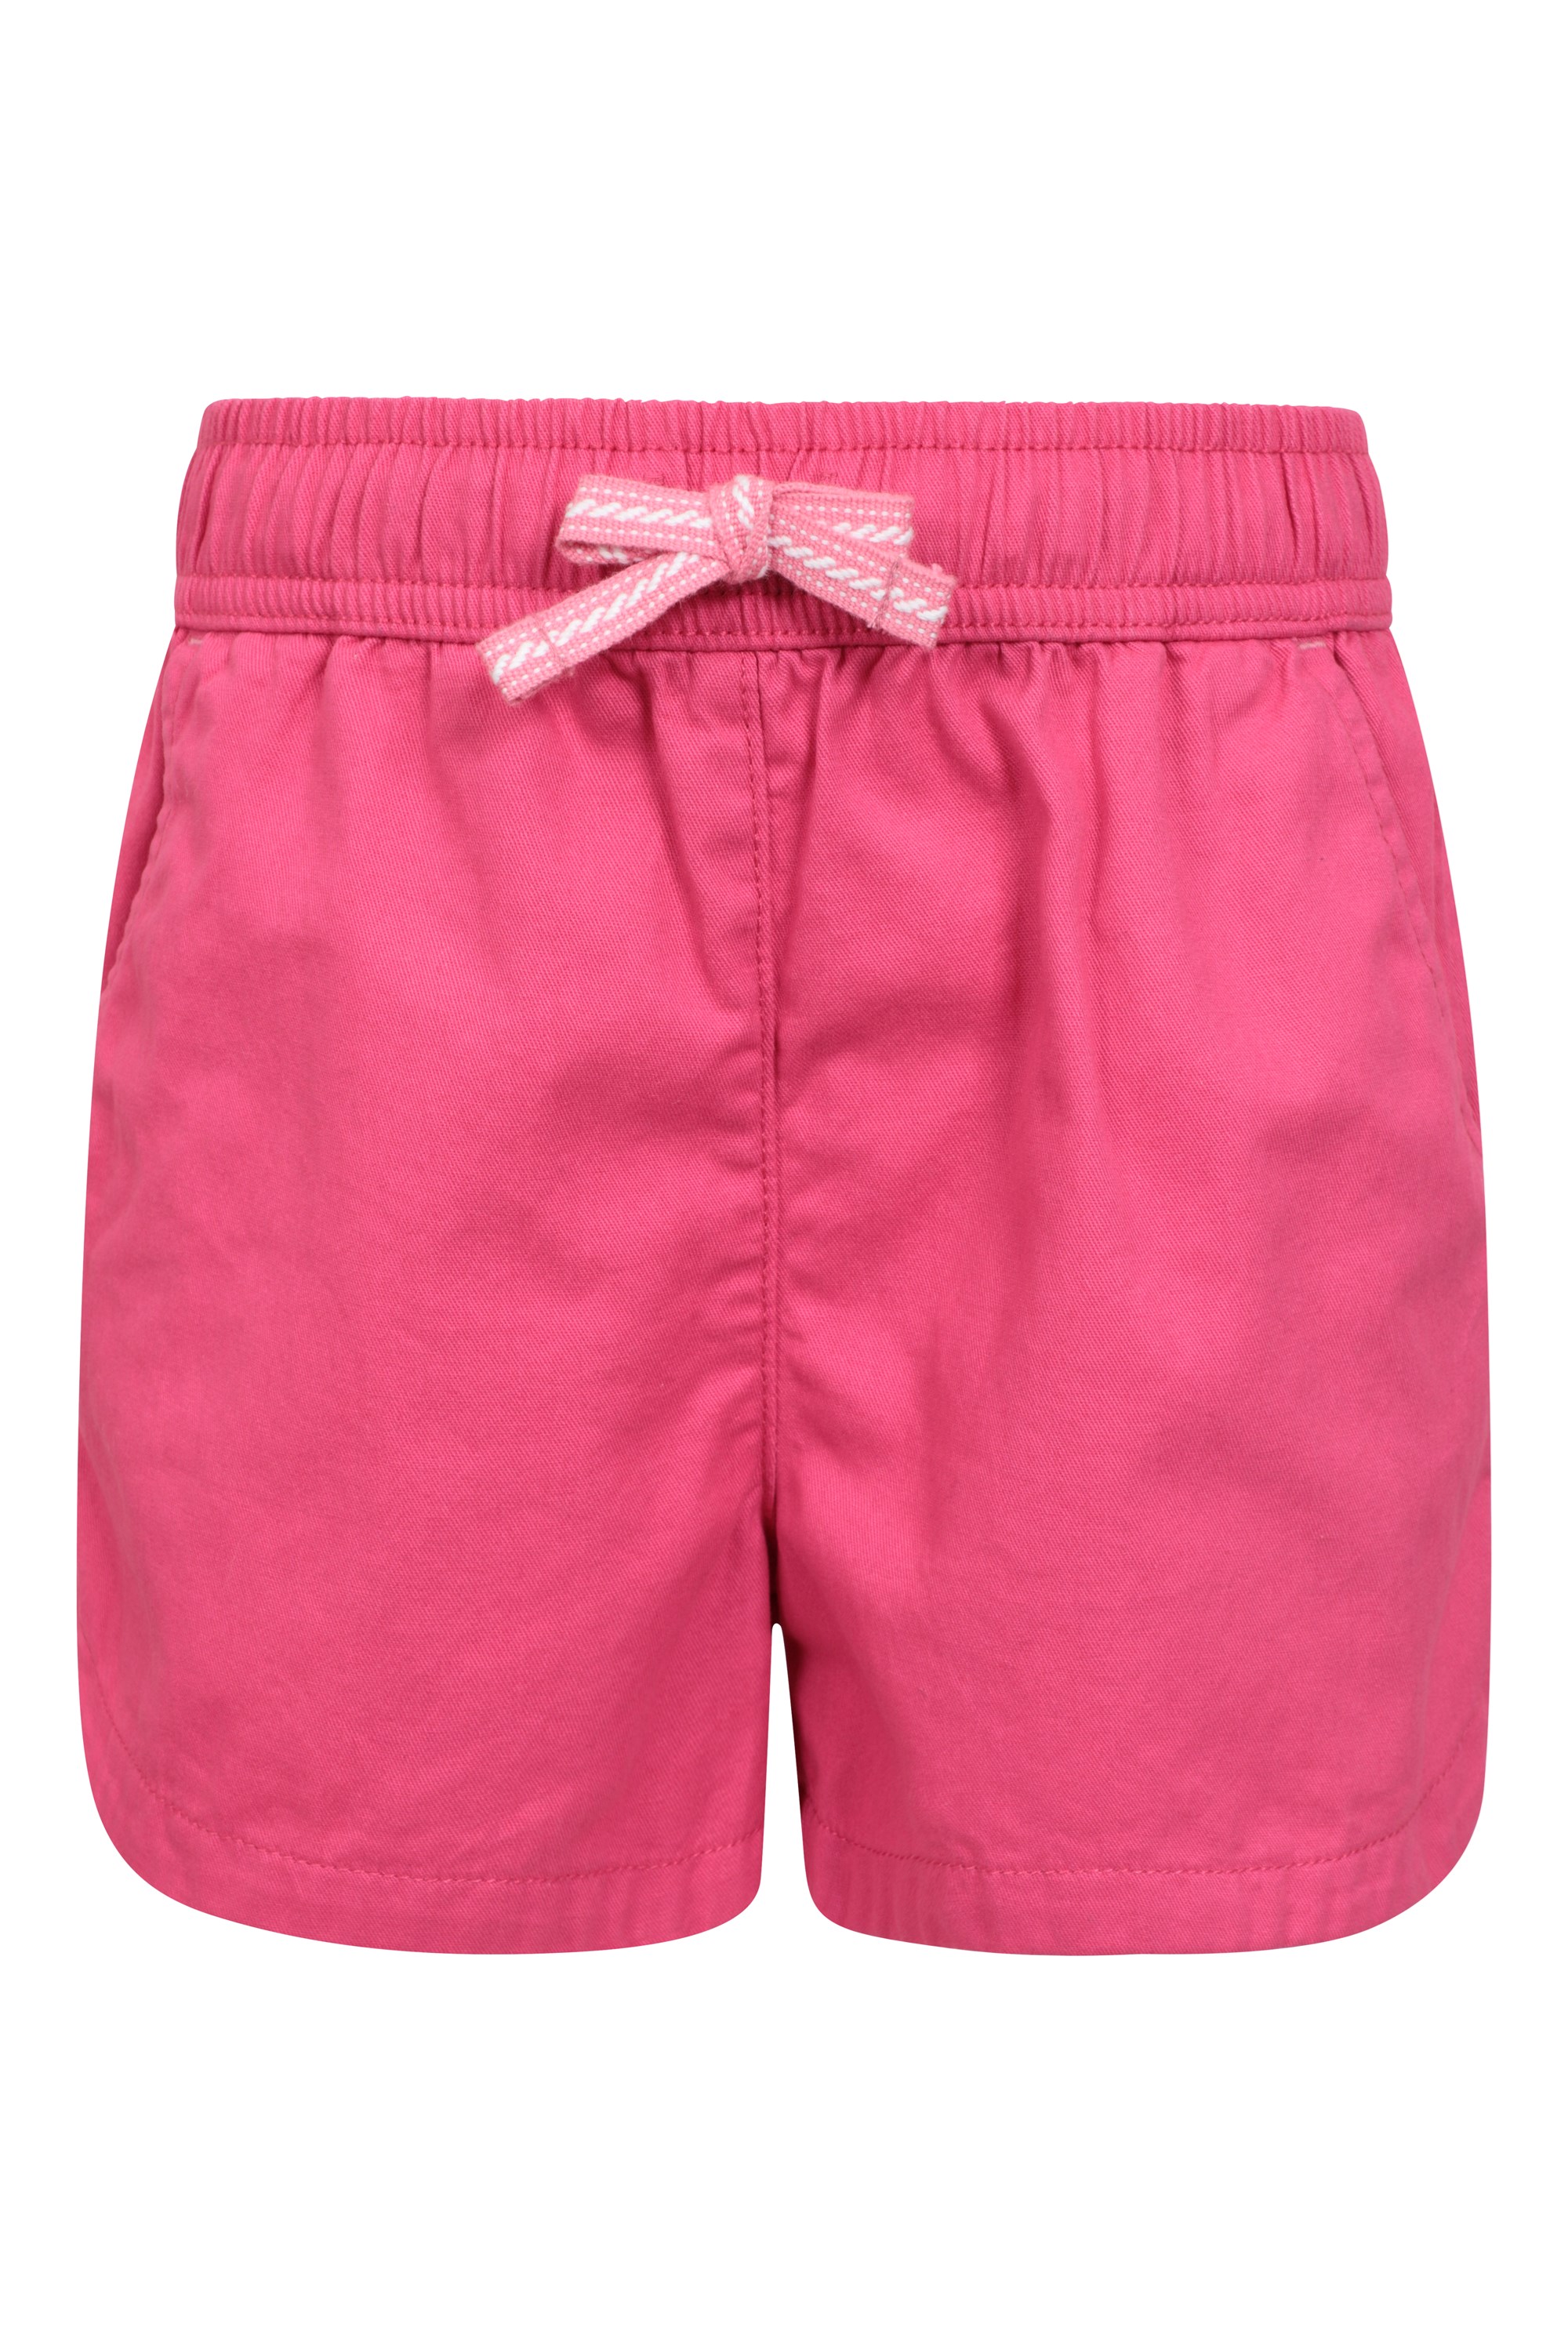 Ideal Casual Clothes When Travelling Cotton Kids Shorts Easy Care Short Pants Summer Hot Pants Breathable Holiday Shorts Mountain Warehouse Waterfall Girls Shorts 